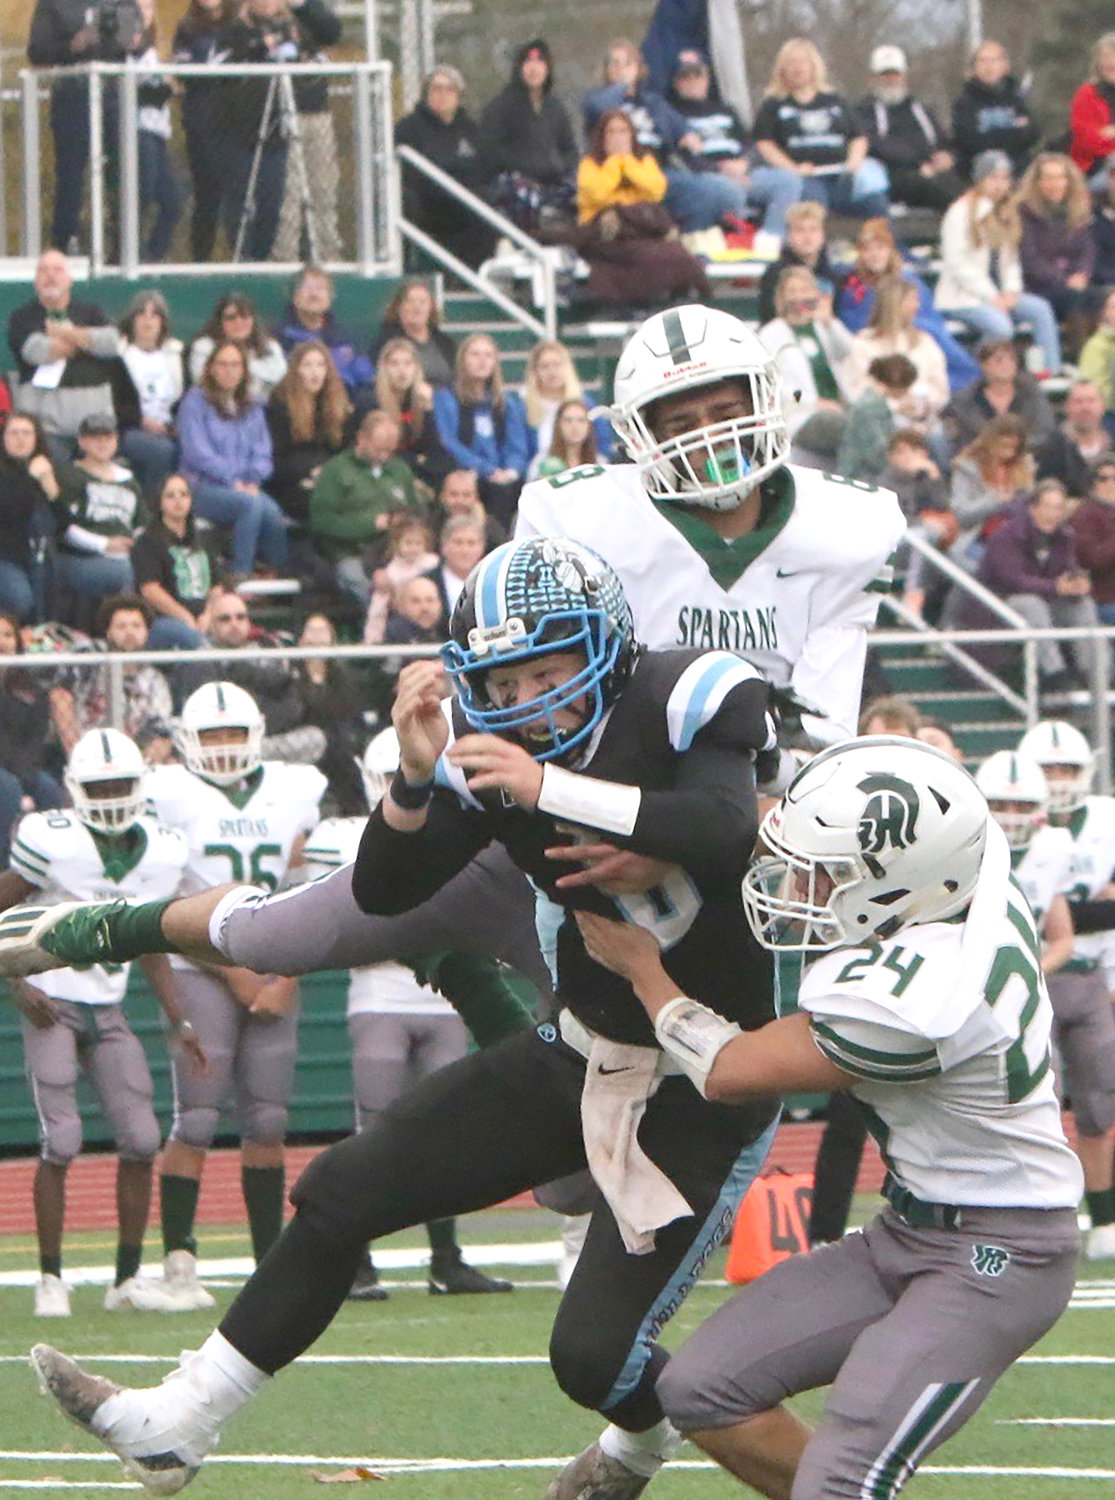 SW quarterback Gavin Hauschild goes up for a pass from Justin Grund and is sandwiched between Spackenkill's Antonio Lopez and Seven Ciancio. He badly twisted his knee and had to exit the game near the end of the second quarter.